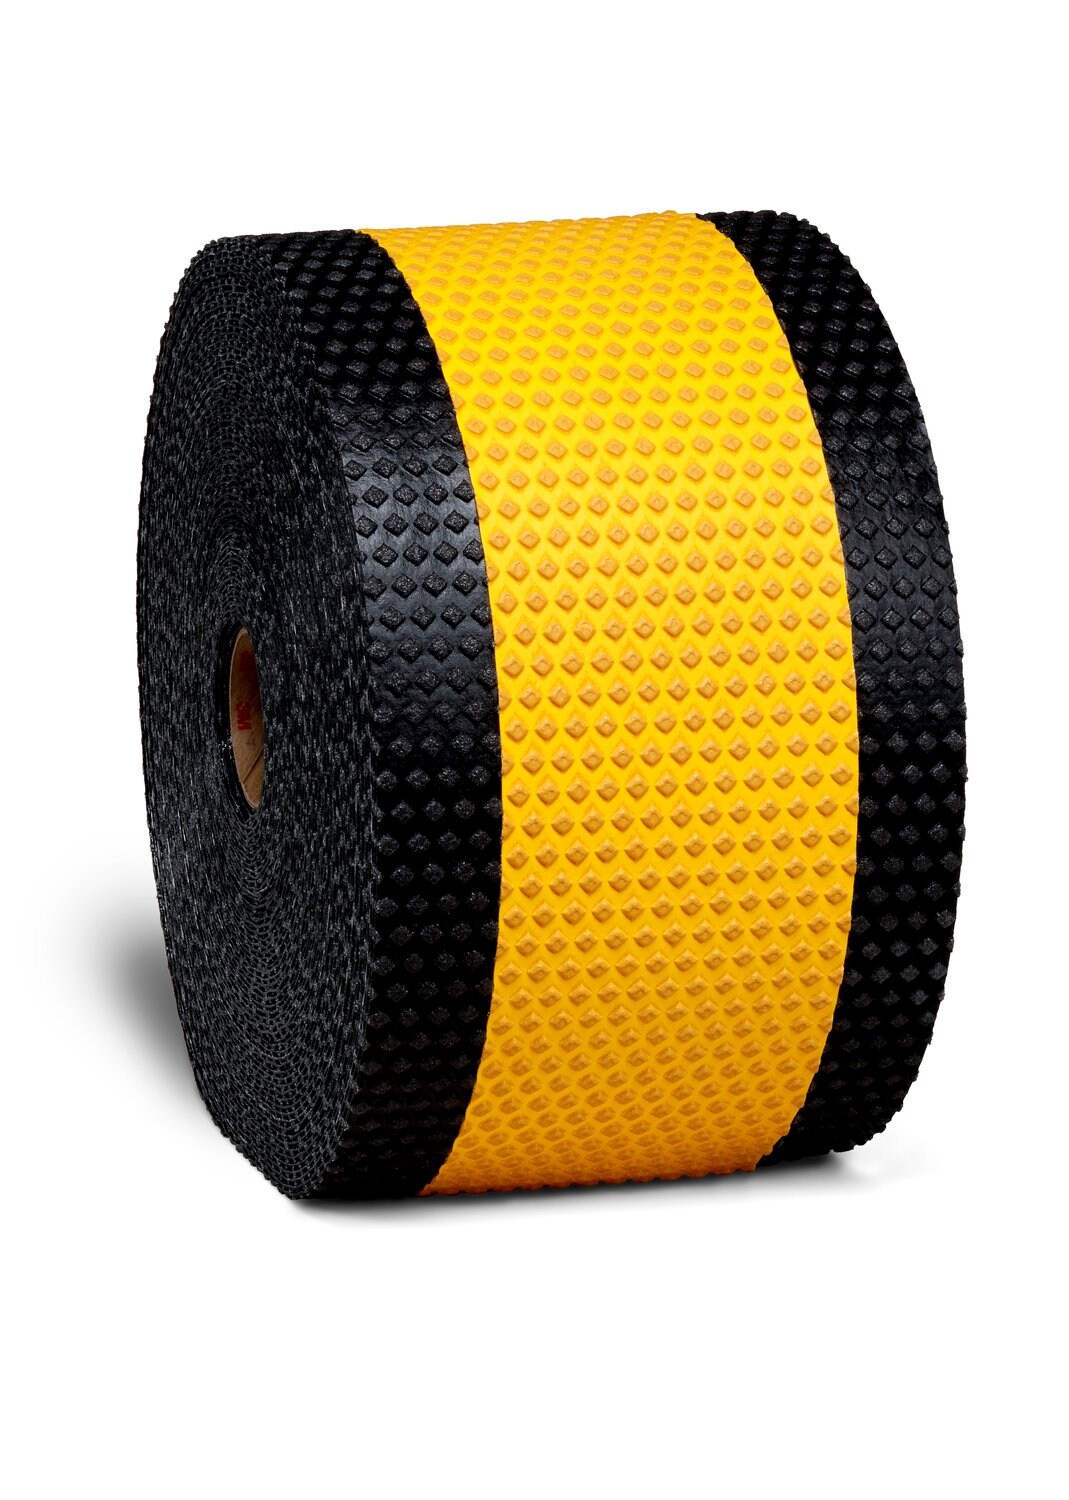 7010389339 - 3M Stamark High Performance Contrast Tape A381AW-5 Yellow/Black, Net,
8 in x 50 yds, 5 in with 1.5 in borders